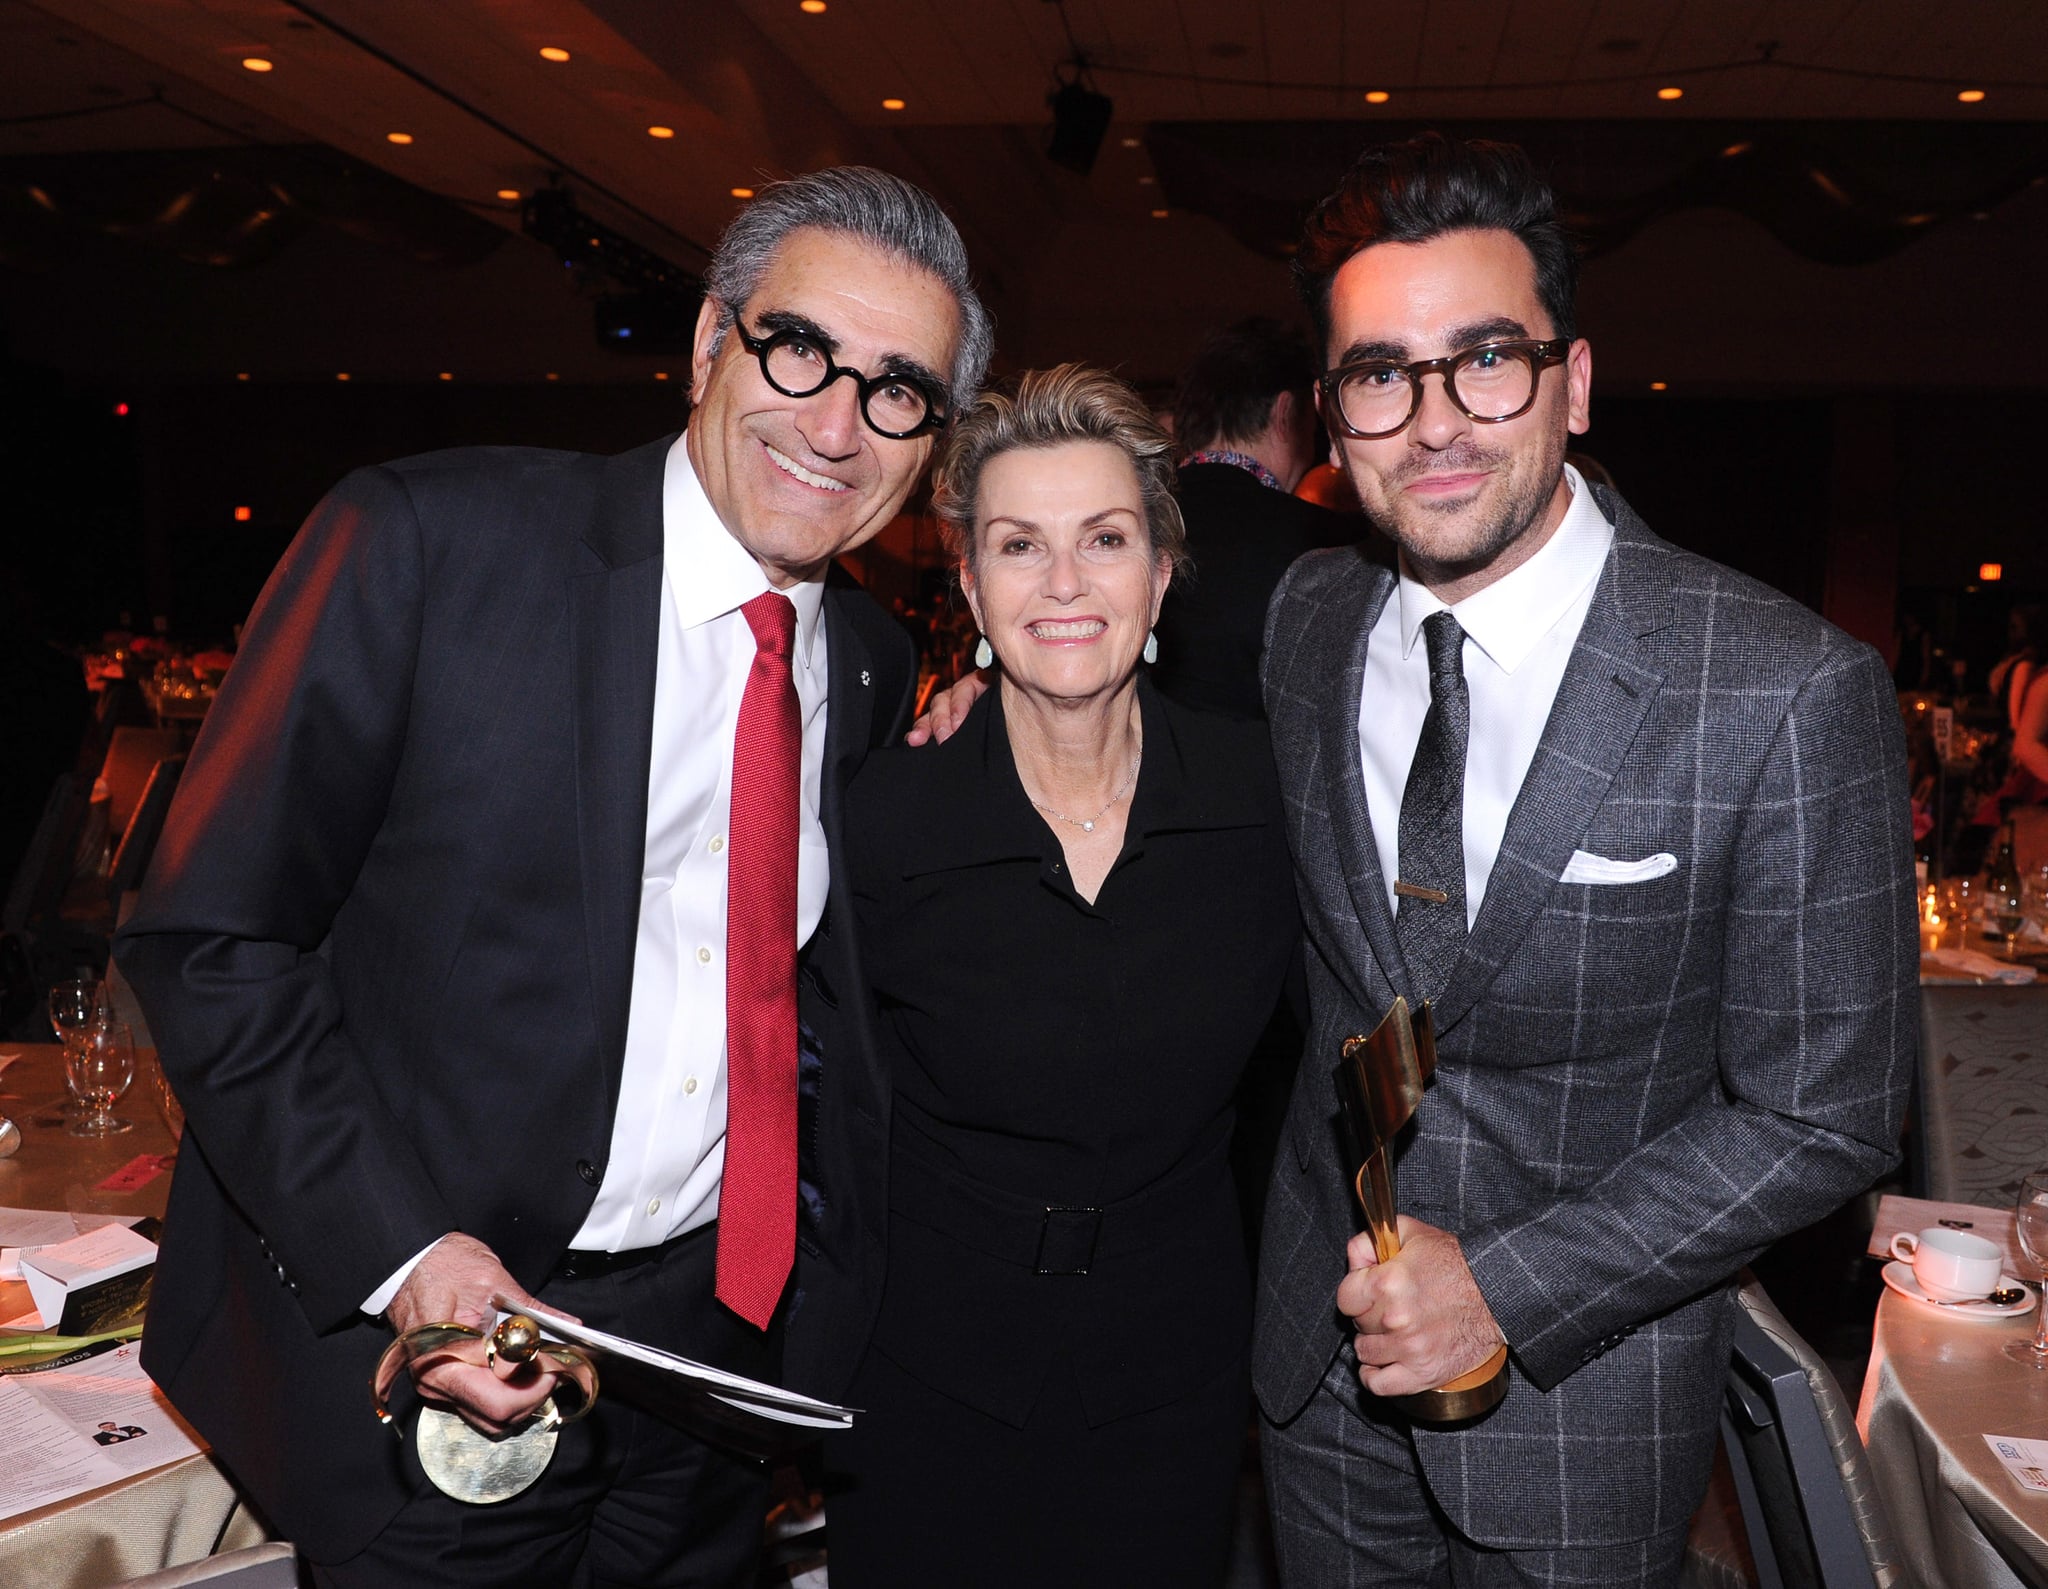 TORONTO, ON - MARCH 09:  (L-R) Actor Eugene Levy, Deborah Divine Levy and actor Daniel Levy attend the Canadian Screen Awards at Westin Harbour Castle Hotel on March 9, 2016 in Toronto, Canada.  (Photo by George Pimentel/Getty Images)